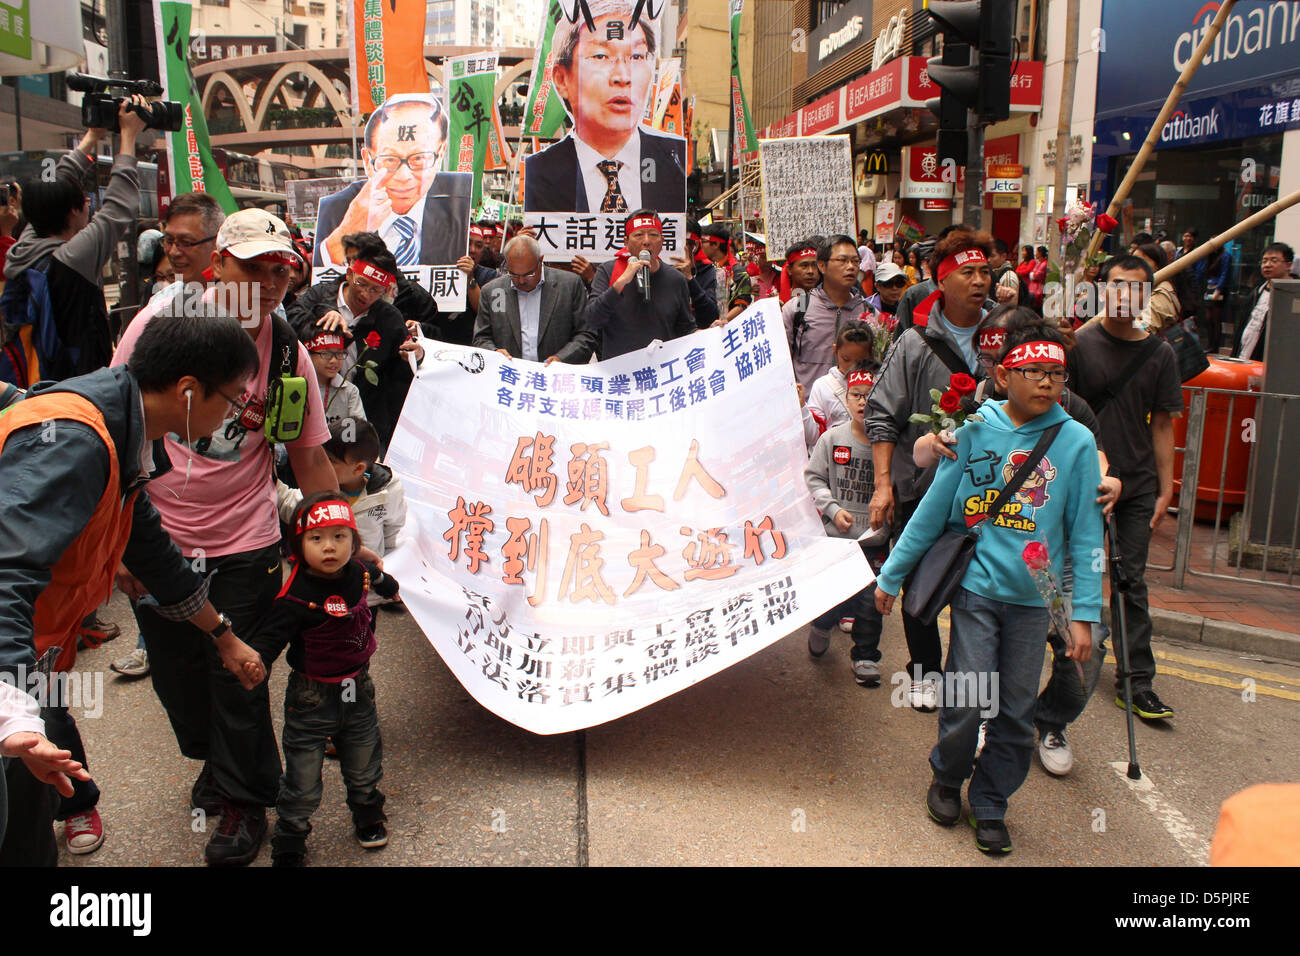 Causeway Bay, Hong Kong. 7th April 2013. Hong Kong legislator and union leader Lee Cheuk-yan (centre with microphone) leads march in support of local dock strikers. Credit: Robert SC Kemp/Alamy Live News Stock Photo